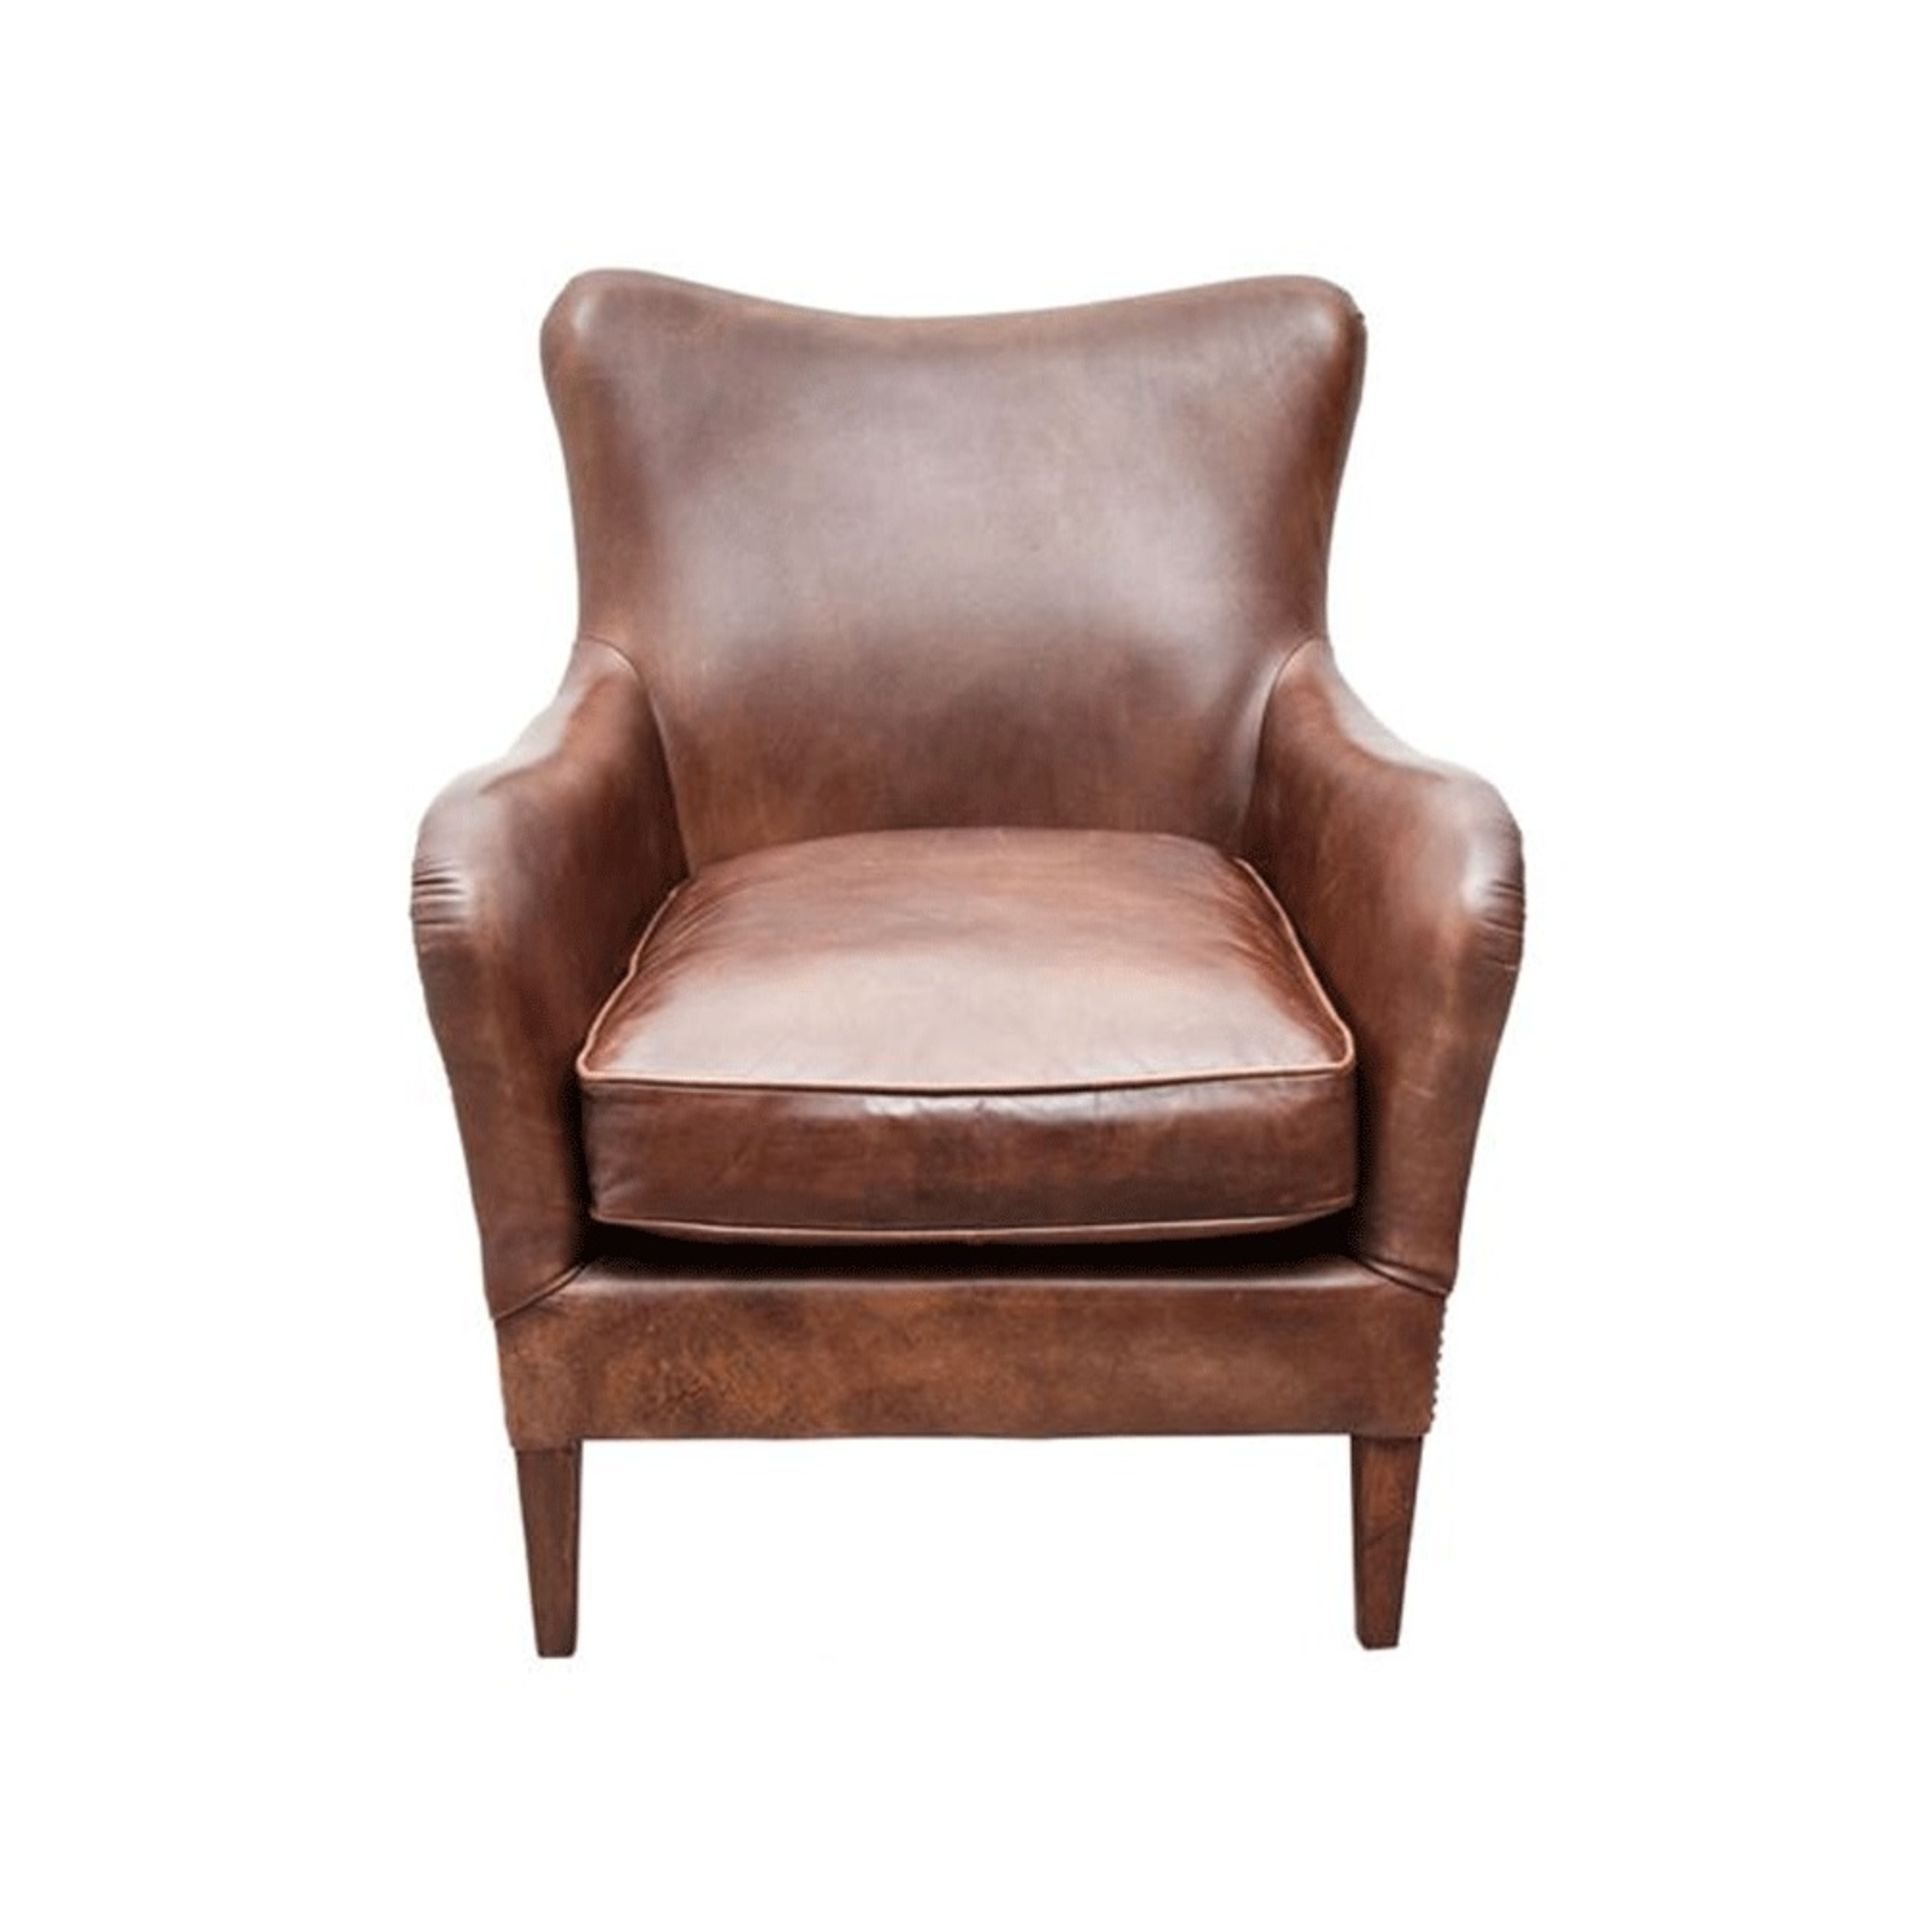 Turnberry Chair Ride Nut Leather The Turnberry Chair Is A Snazzy Modern Take On The Vintage Club